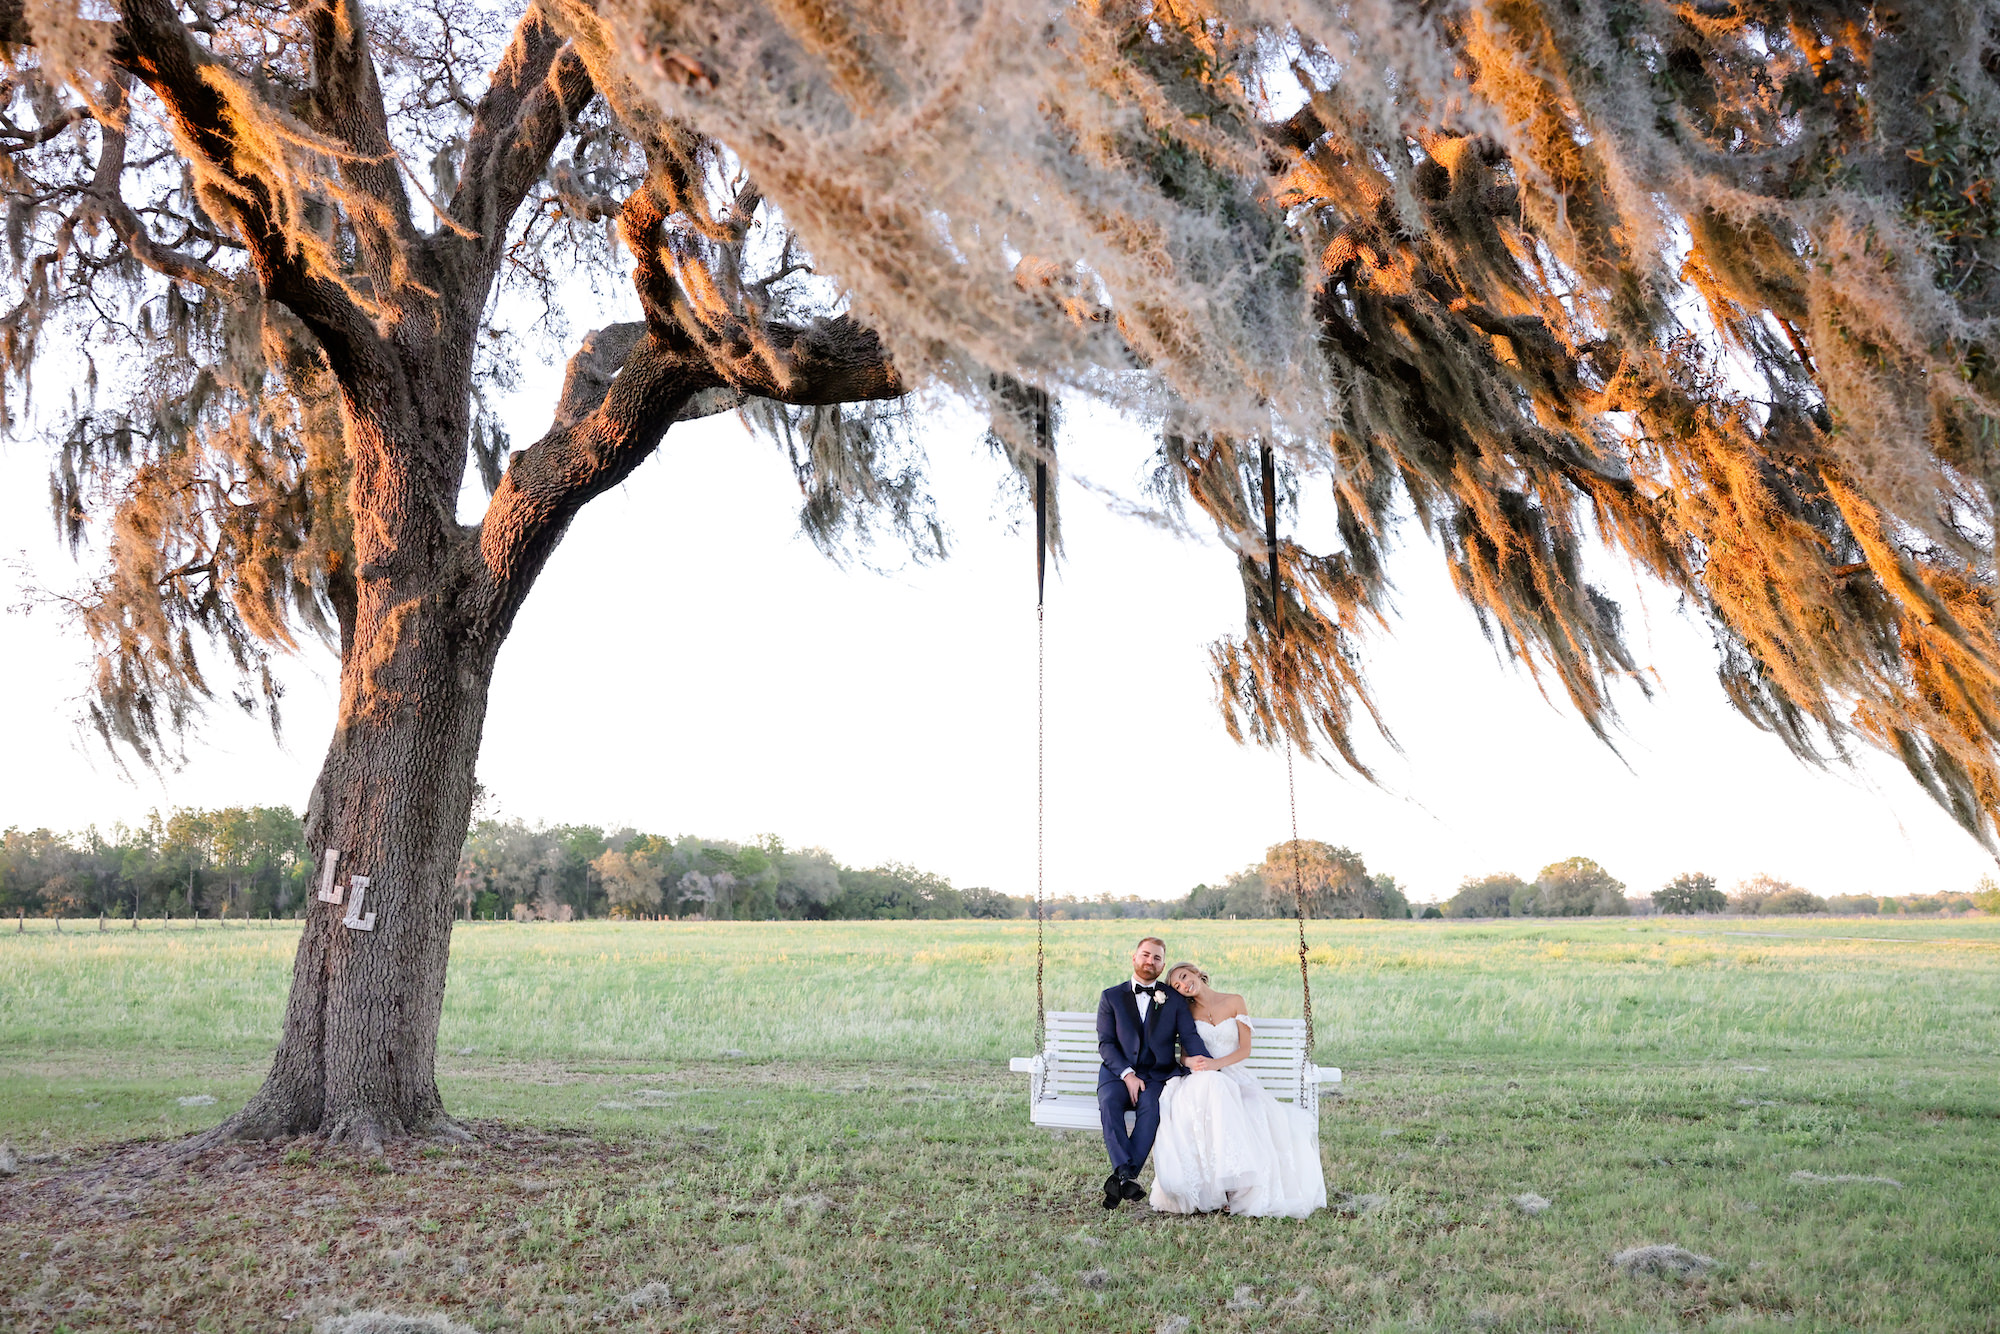 Bride and Groom Southern Inspired Swing Wedding Portrait | Brooksville Wedding Venue Legacy Lane Weddings | Dress Truly Forever Bridal | Photographer Lifelong Photography